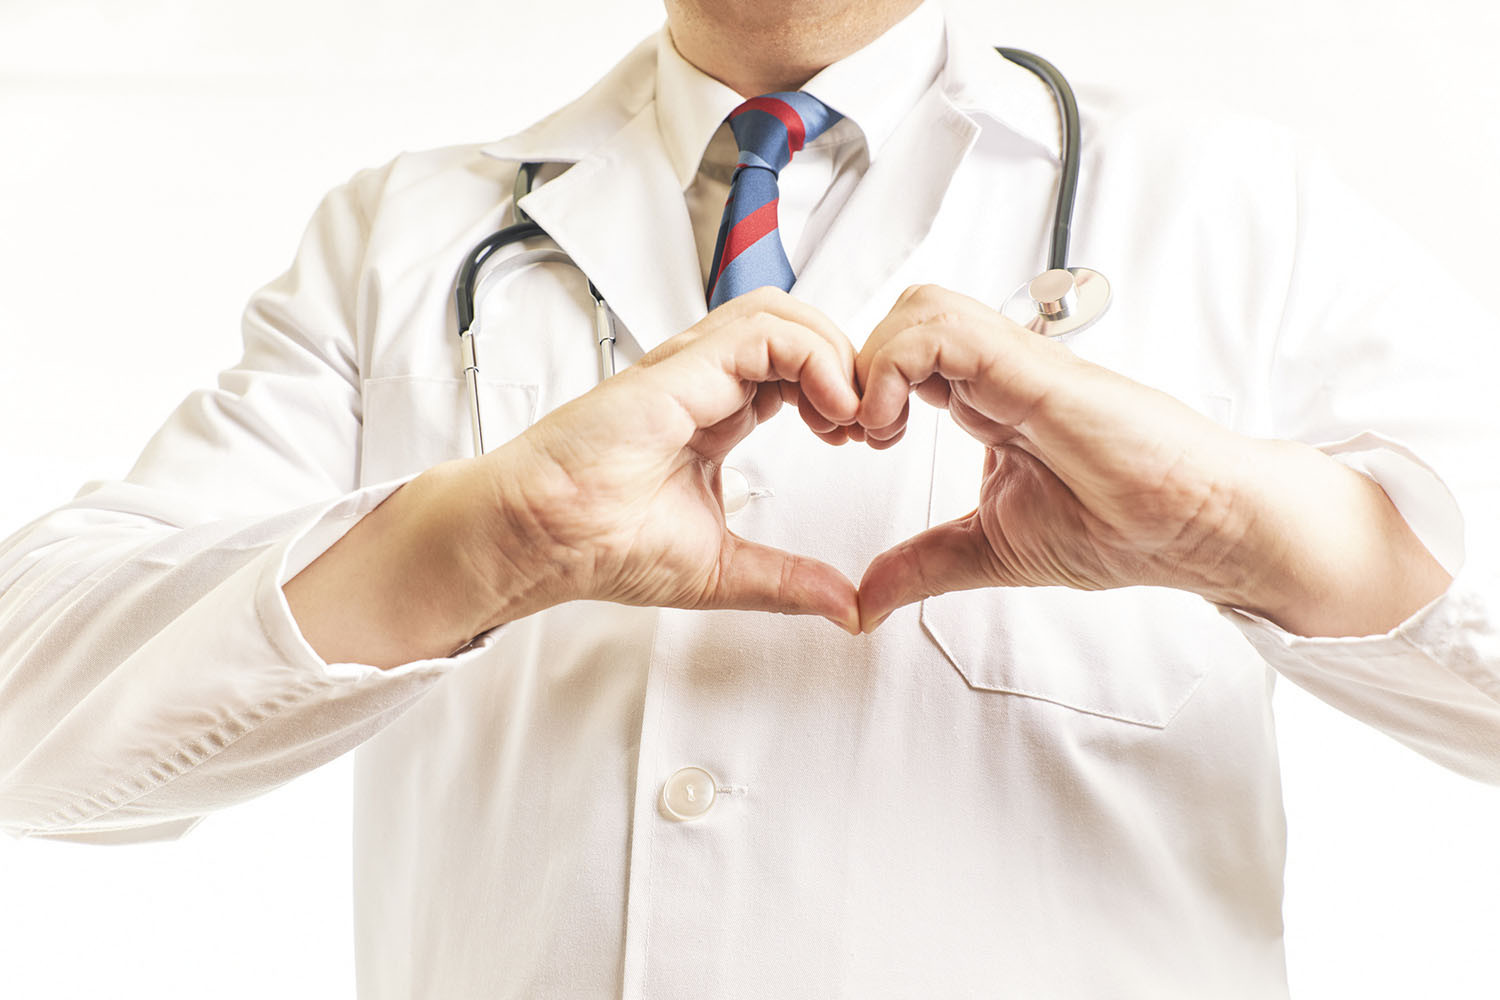 cropped photo showing the torso and arms of a doctor wearing a white lab coat with a stethoscope around his neck holding his hands in front of him making the shape of a heart